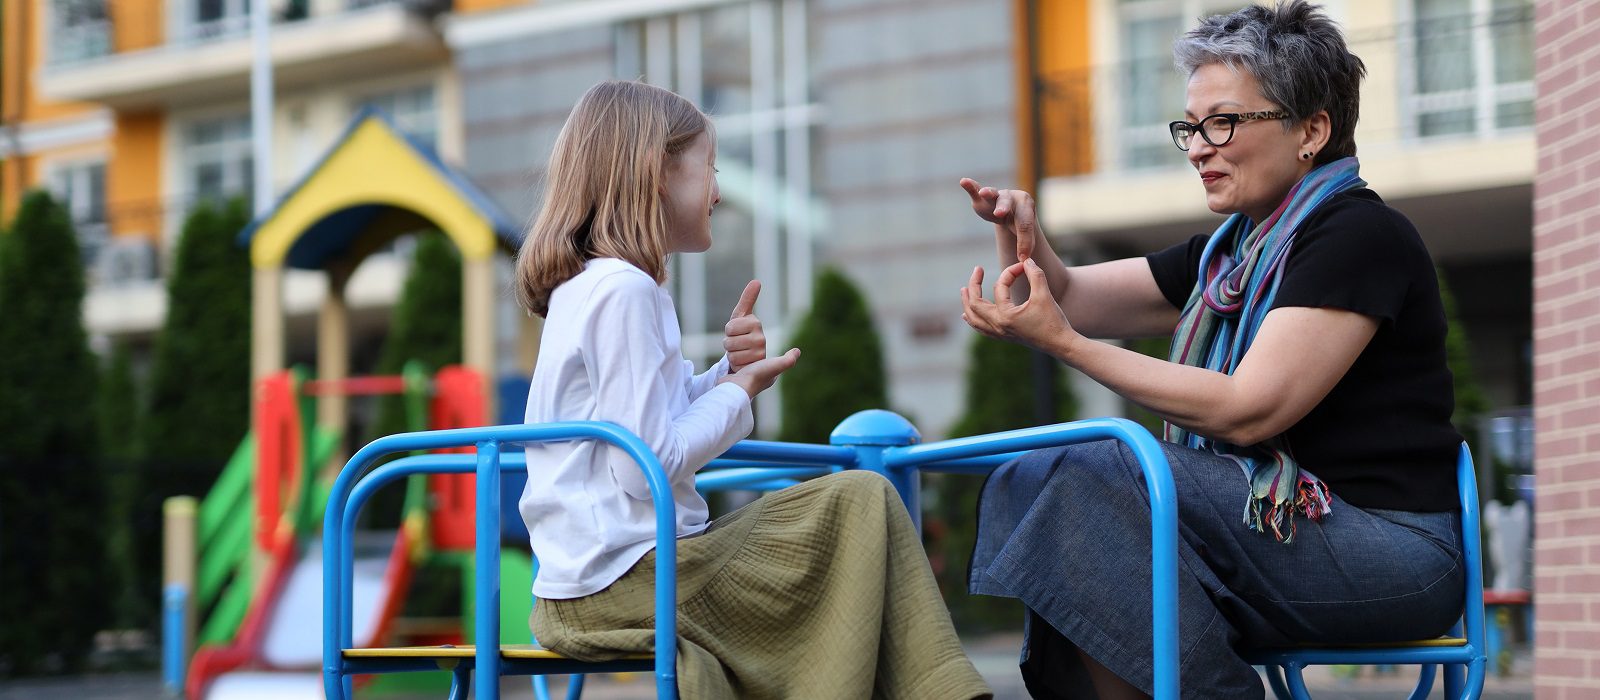 Two people have fun on a blue merry-go-round. They are sitting on the seats and holding the handles. They are teacher and student. They are deaf or learning signs.